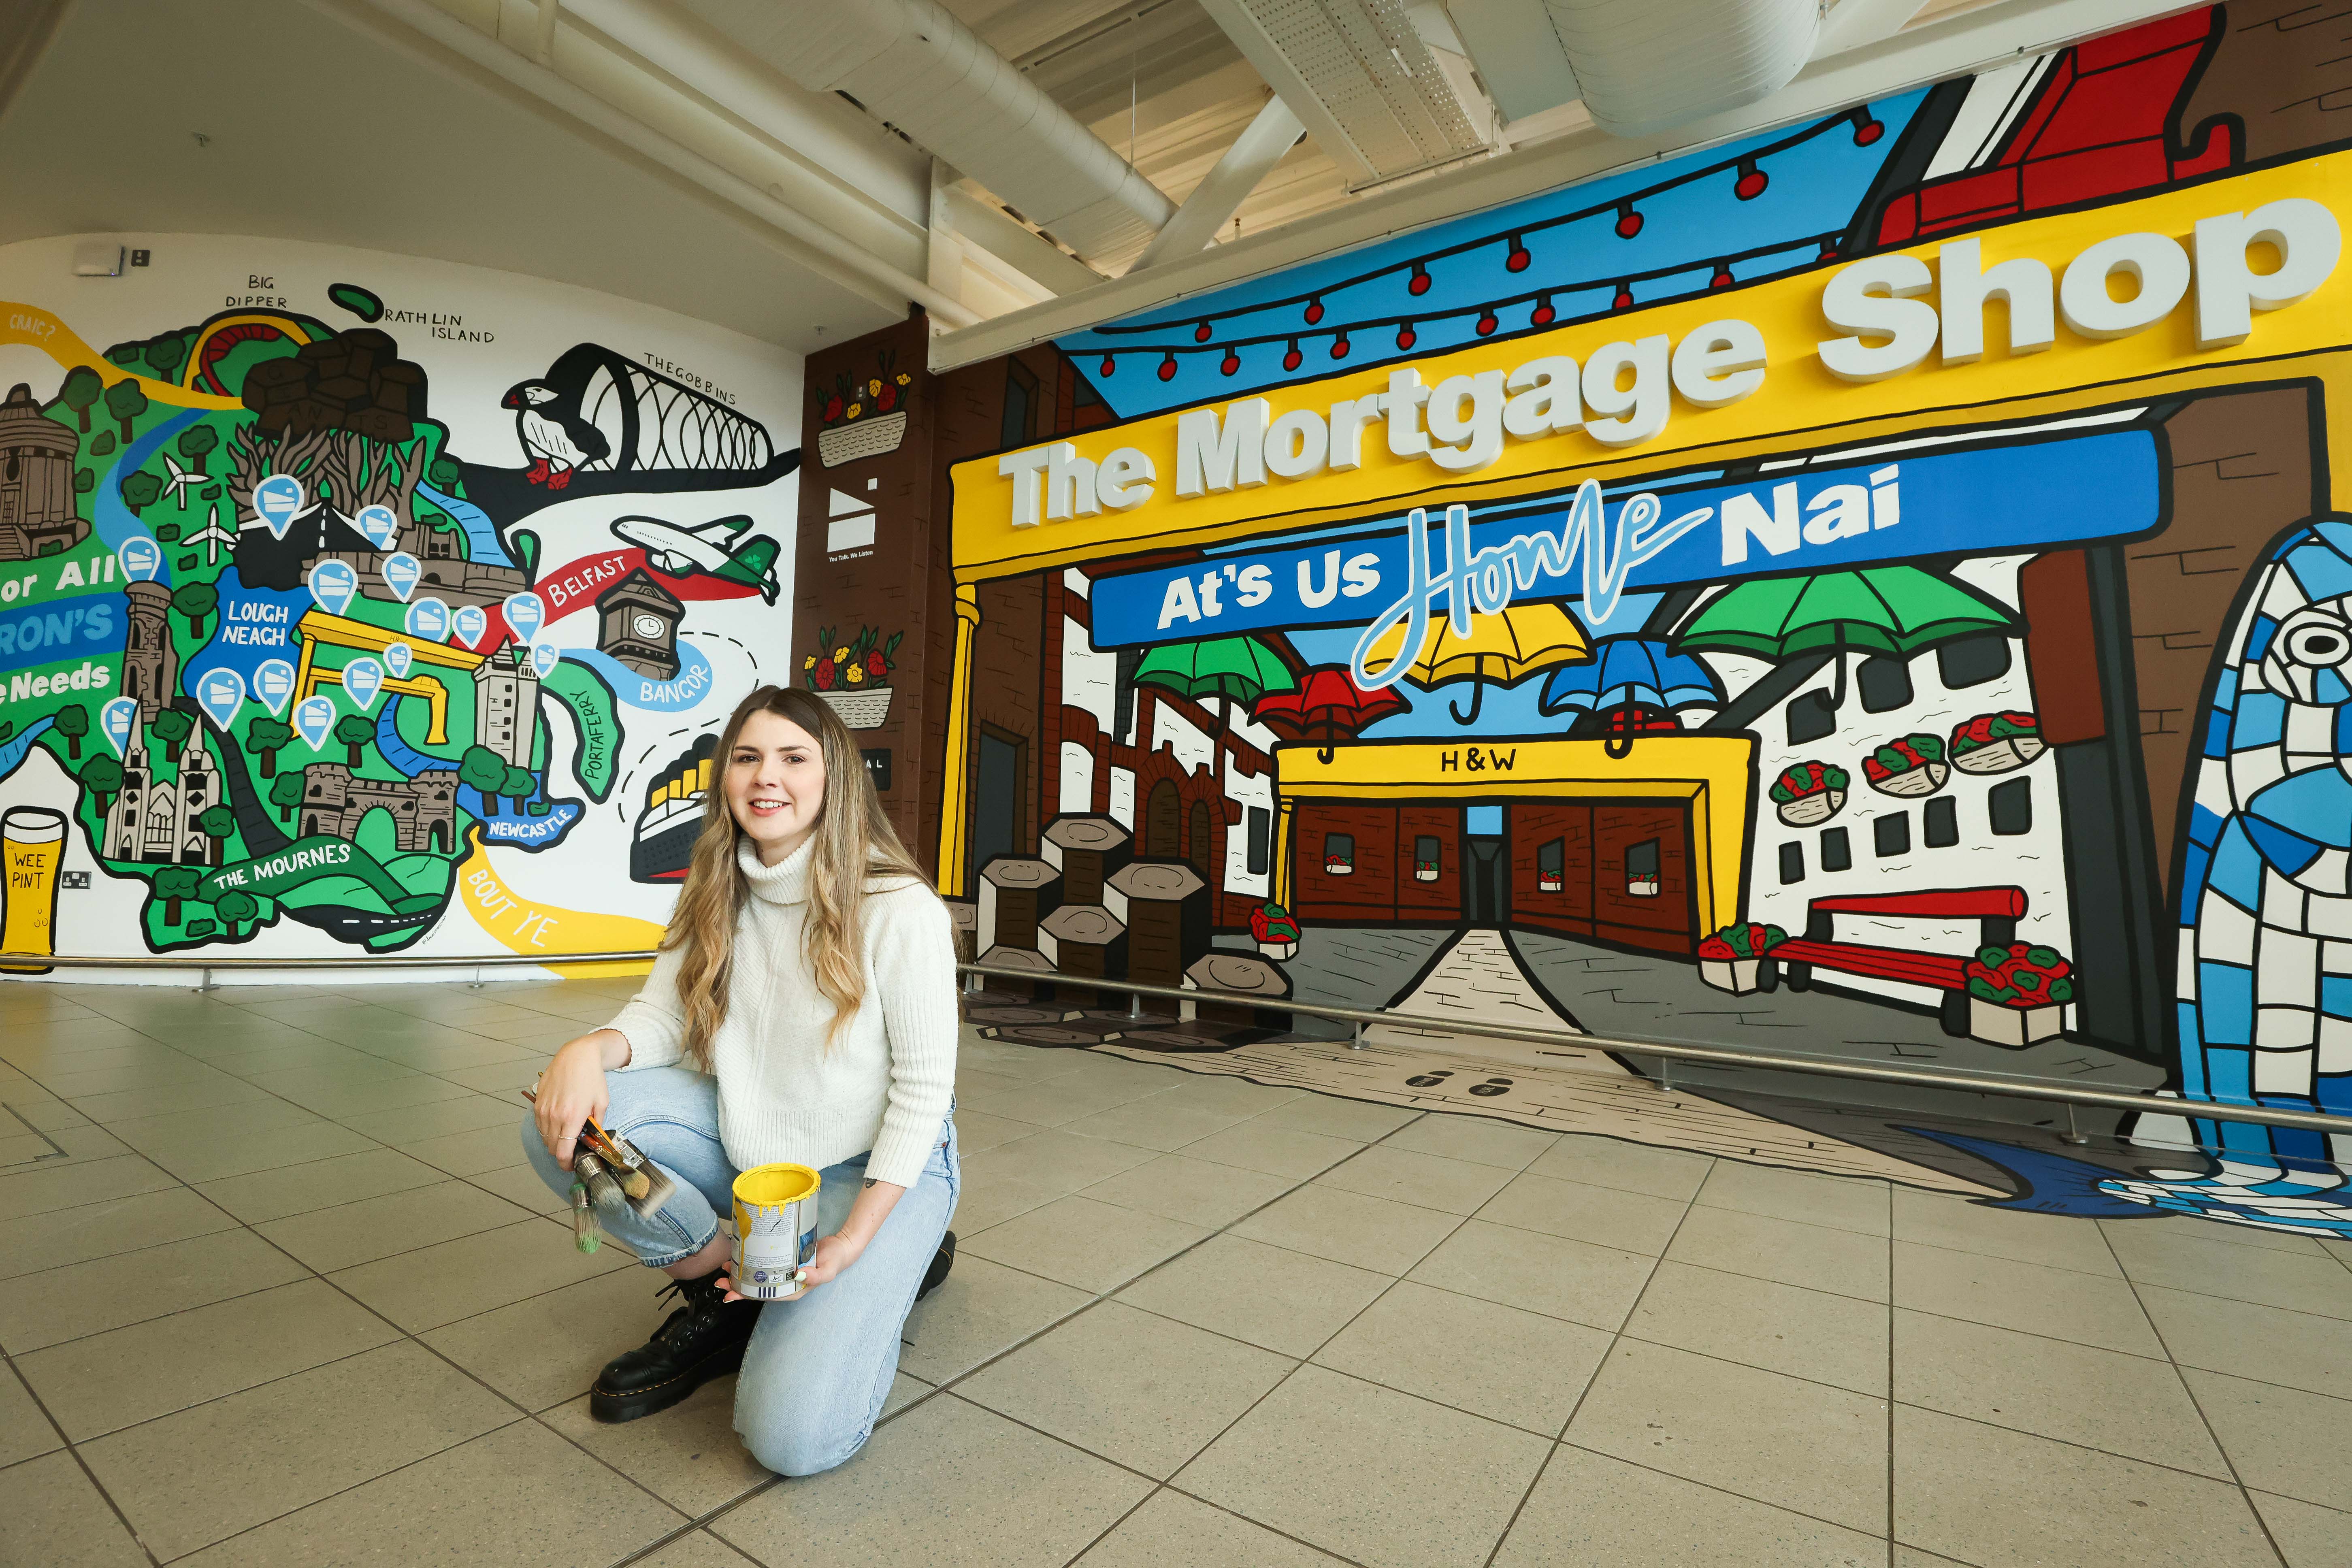 Danni Simpson's mural at Belfast City Airport for The Mortgage Shop